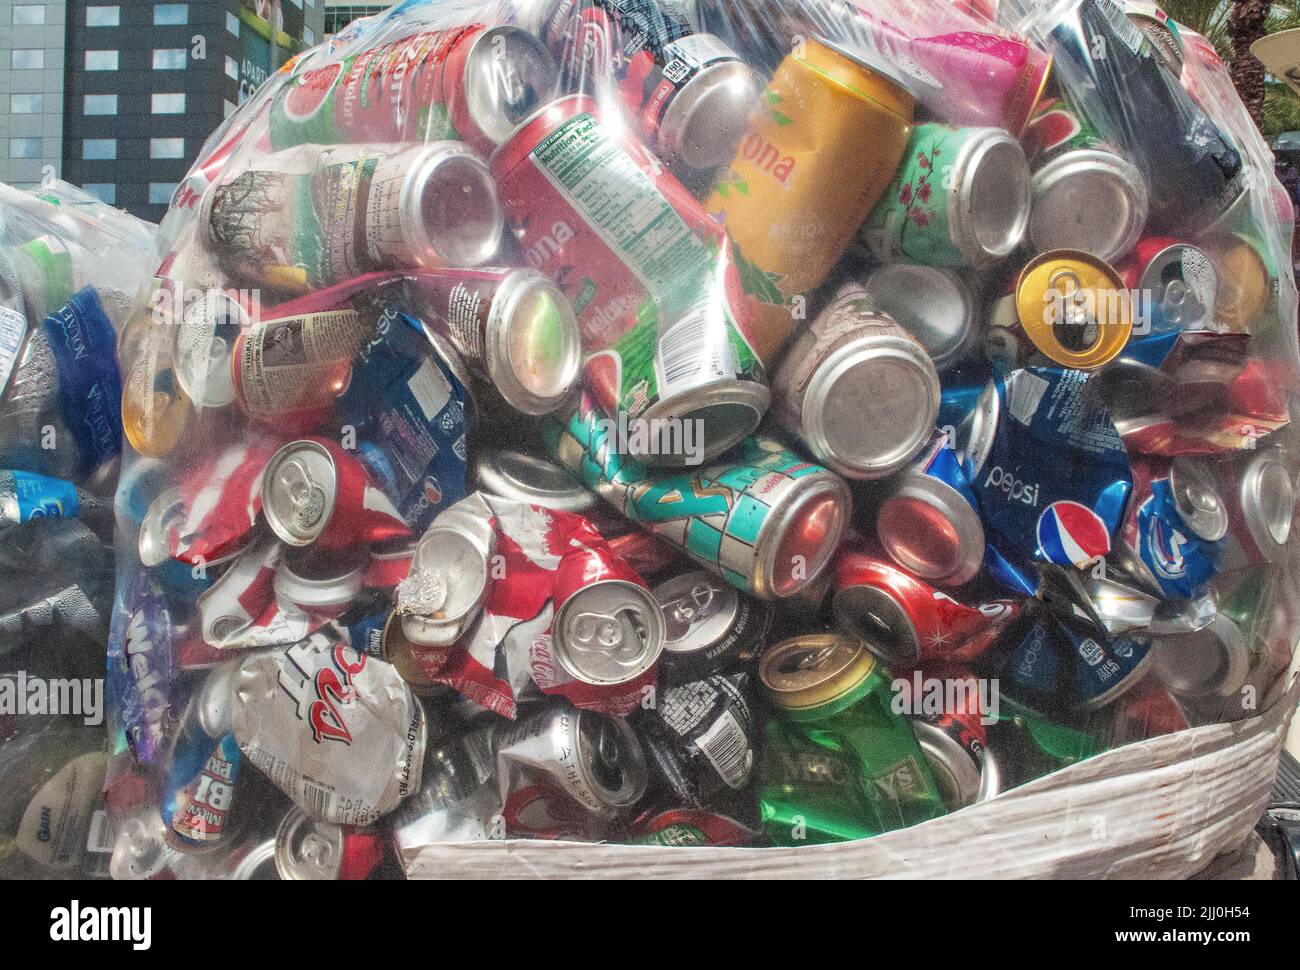 soda cans collected for reycycling Stock Photo